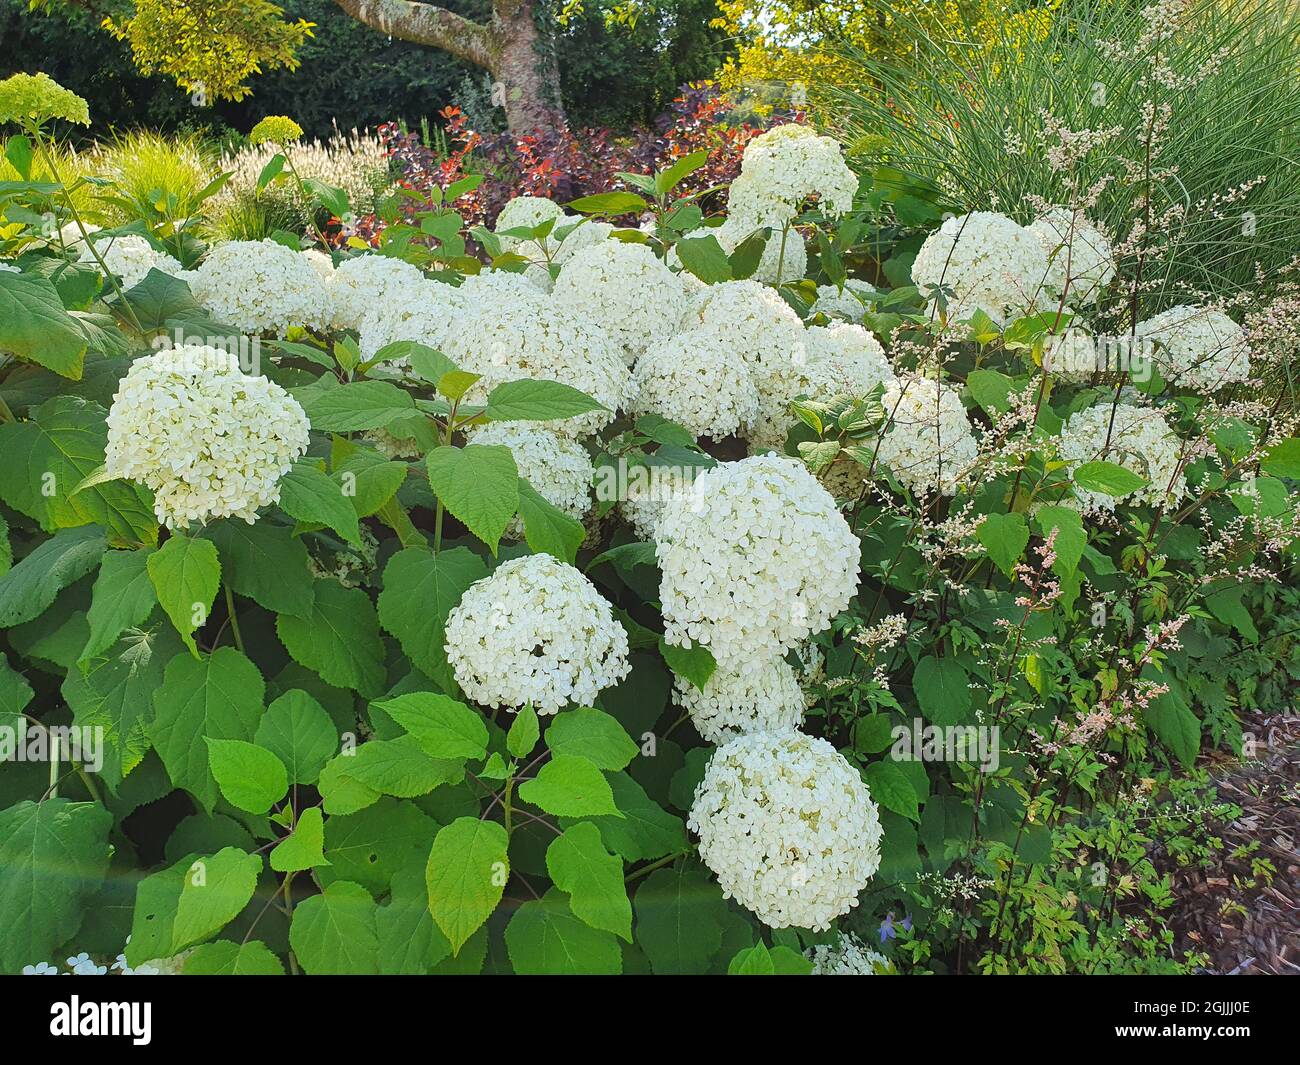 Hydrangea Arborescens 'Annabelle' summer autumn fall flowering plant with a white summertime flower, stock photo image Stock Photo